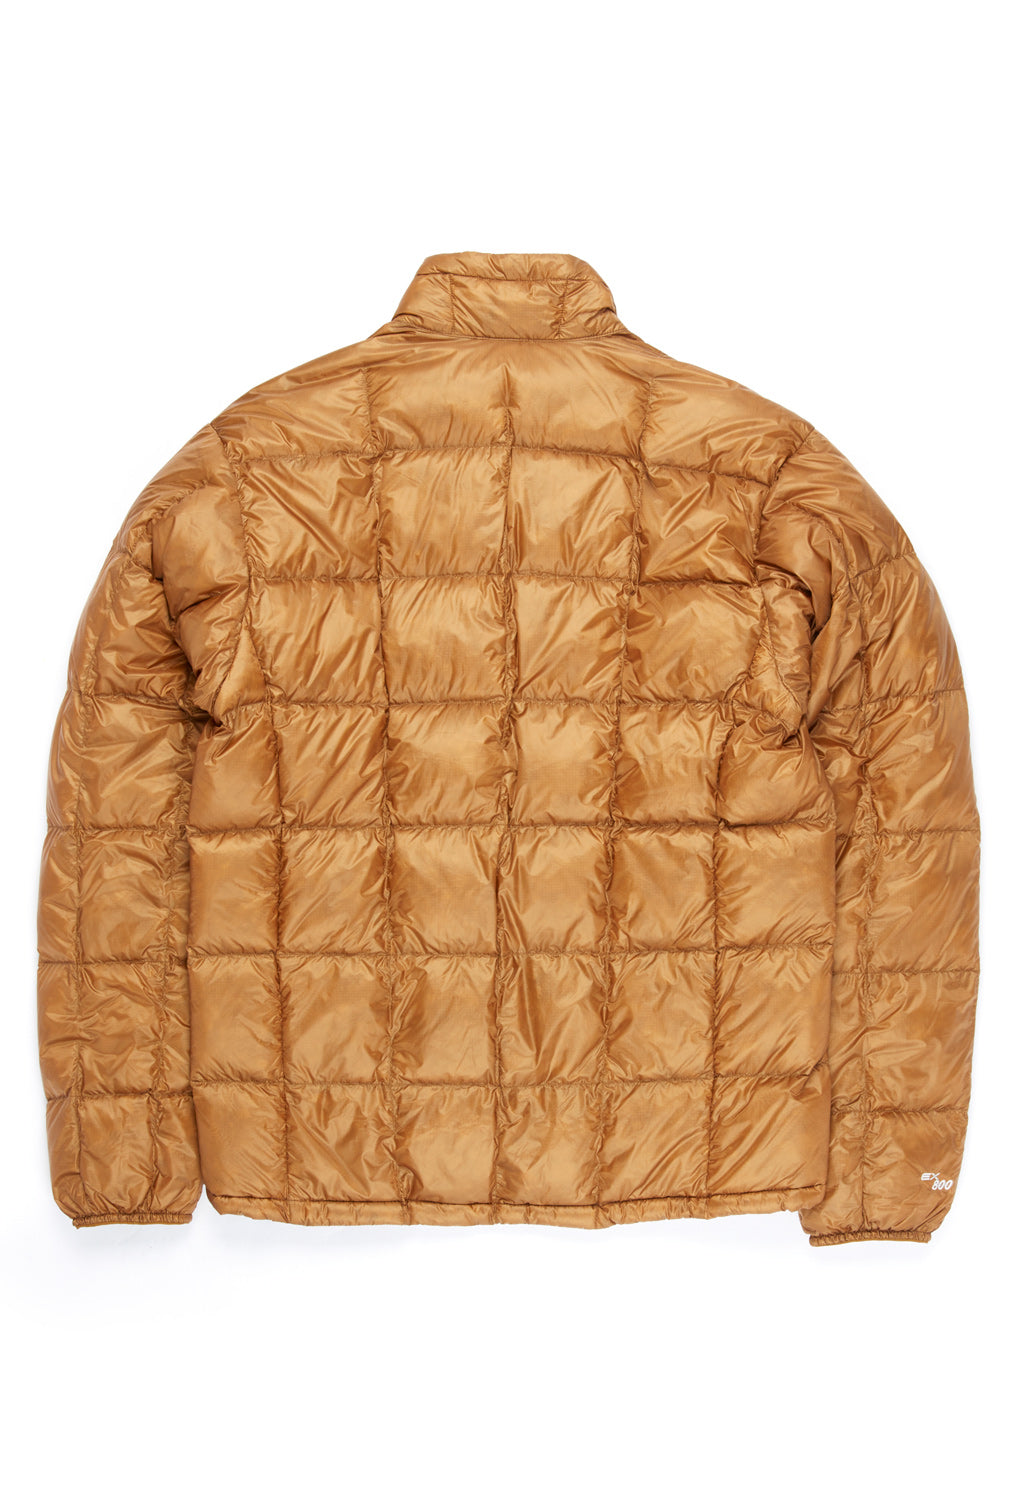 Montbell Men's Superior Down Jacket - Brown